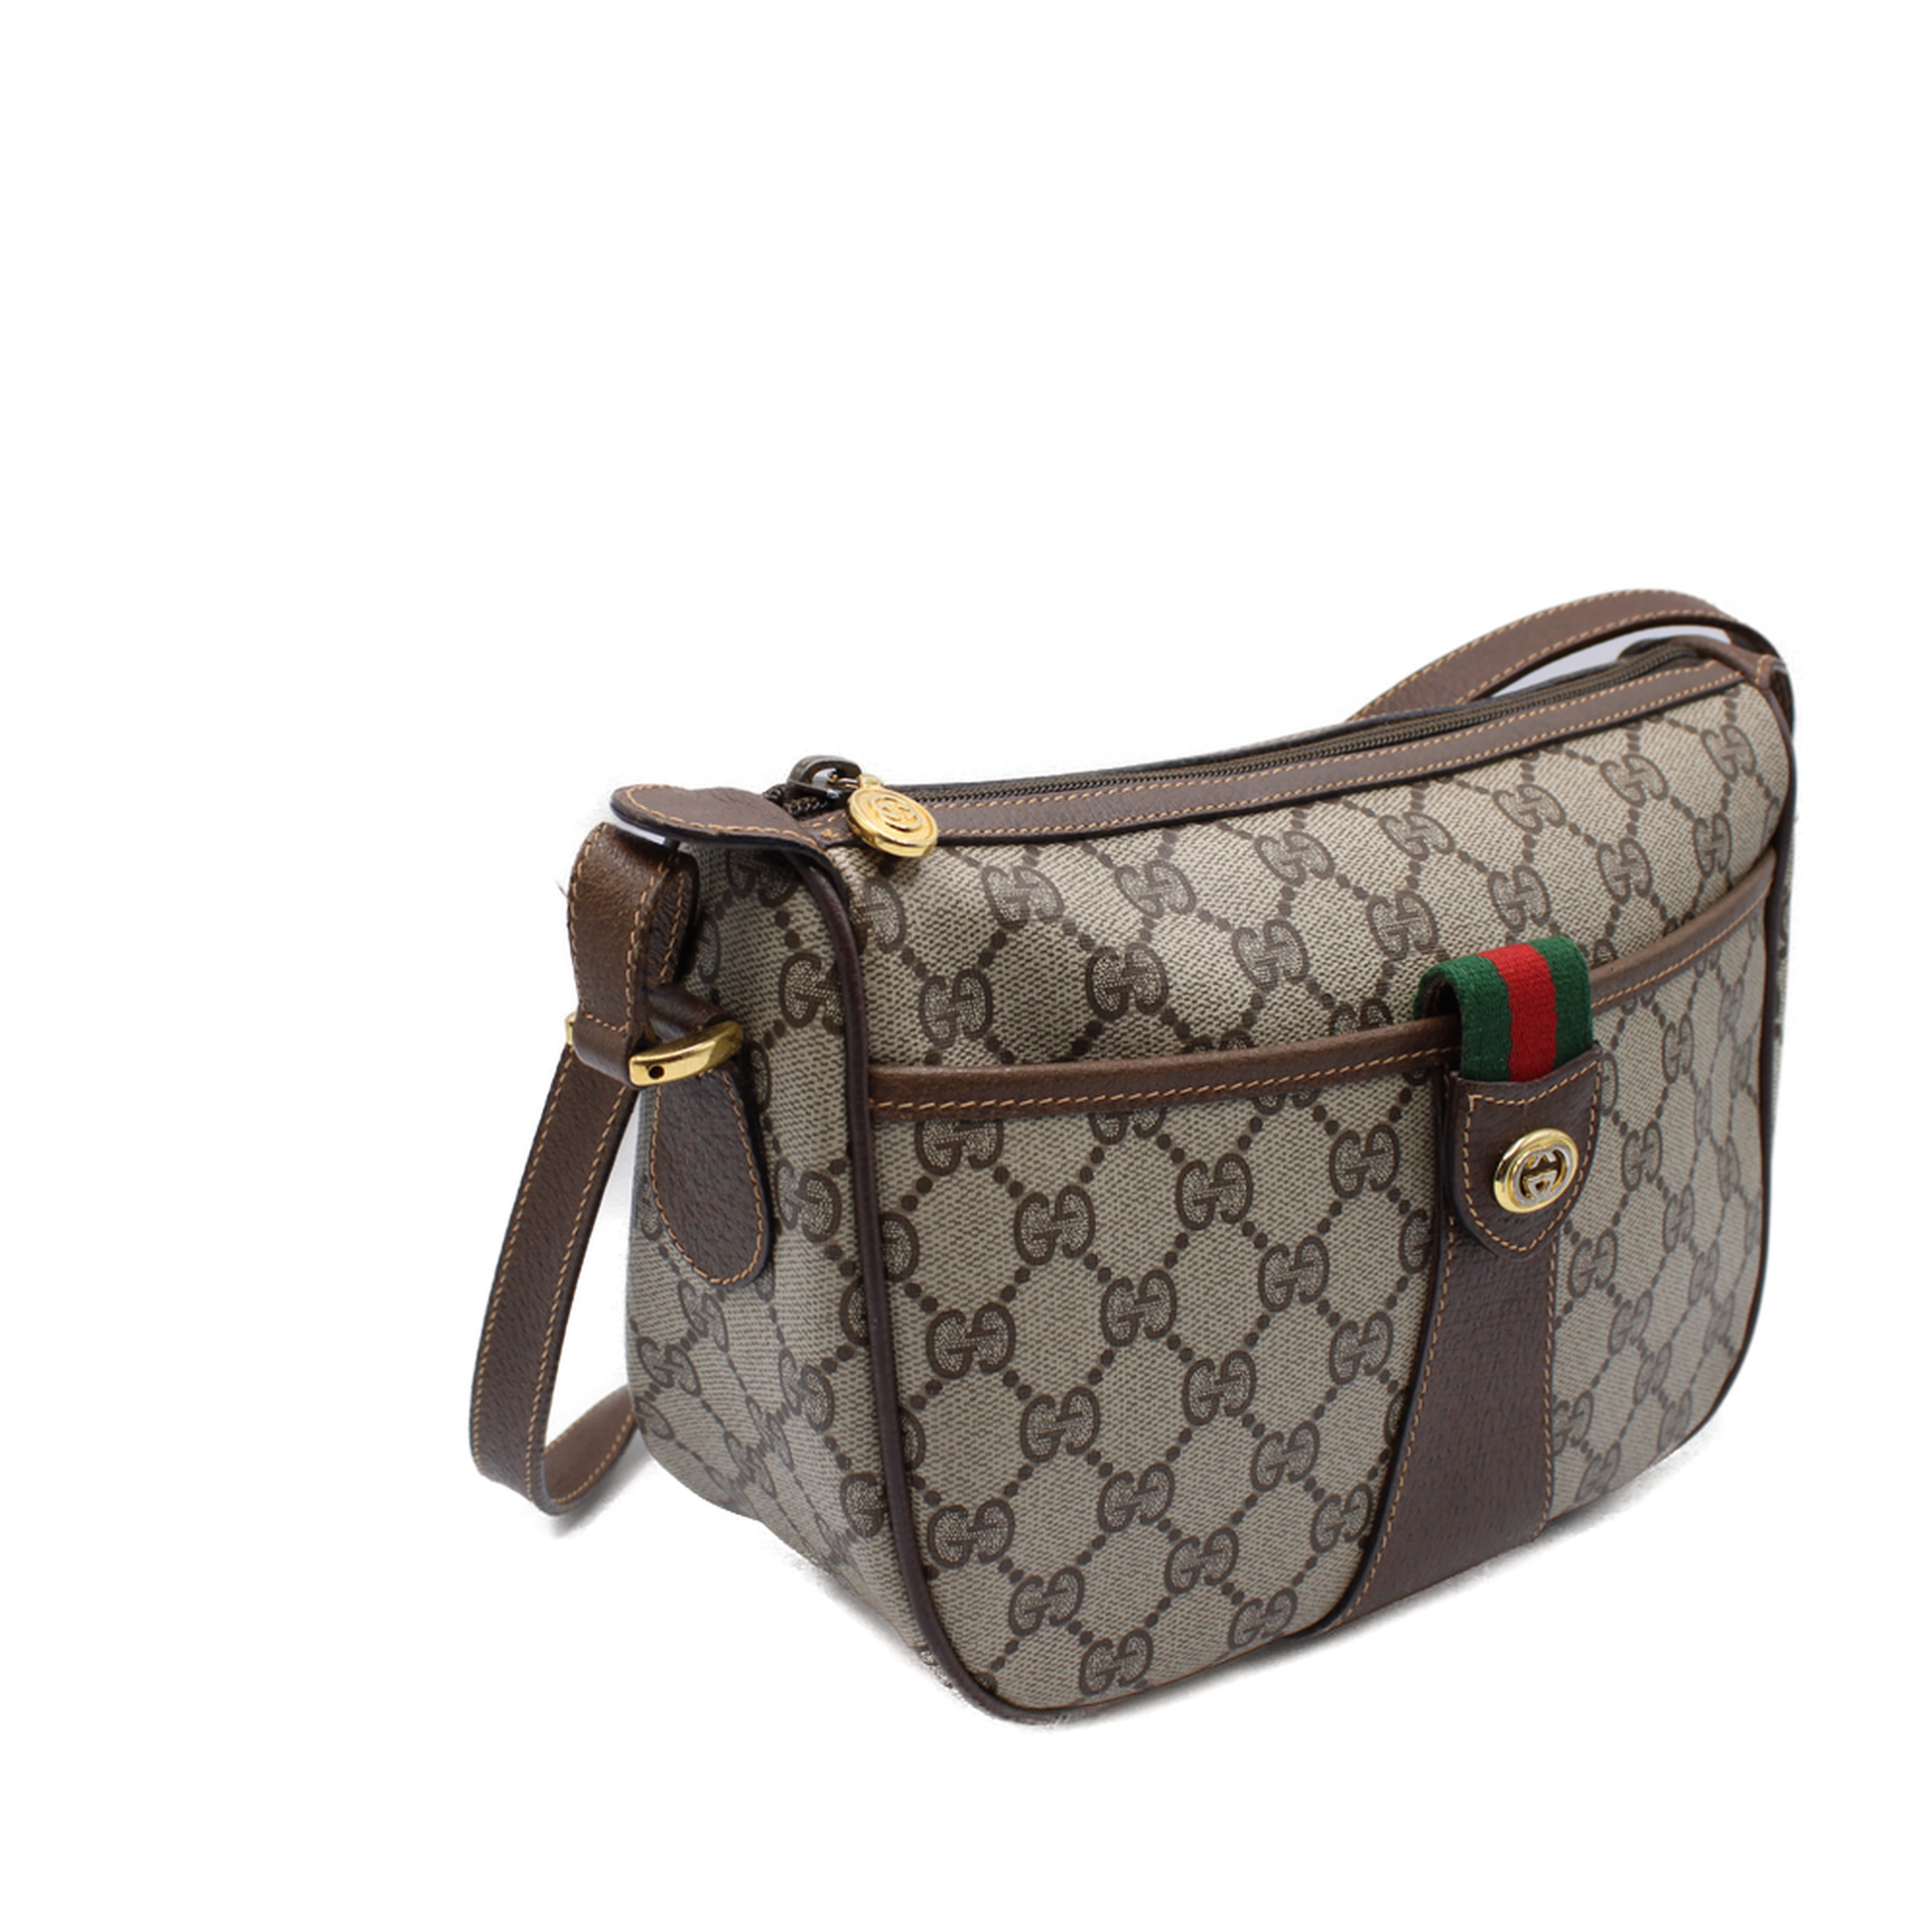 Gucci Supreme Ophidia GG Canvas Brown Leather Trim Crossbody Bag side